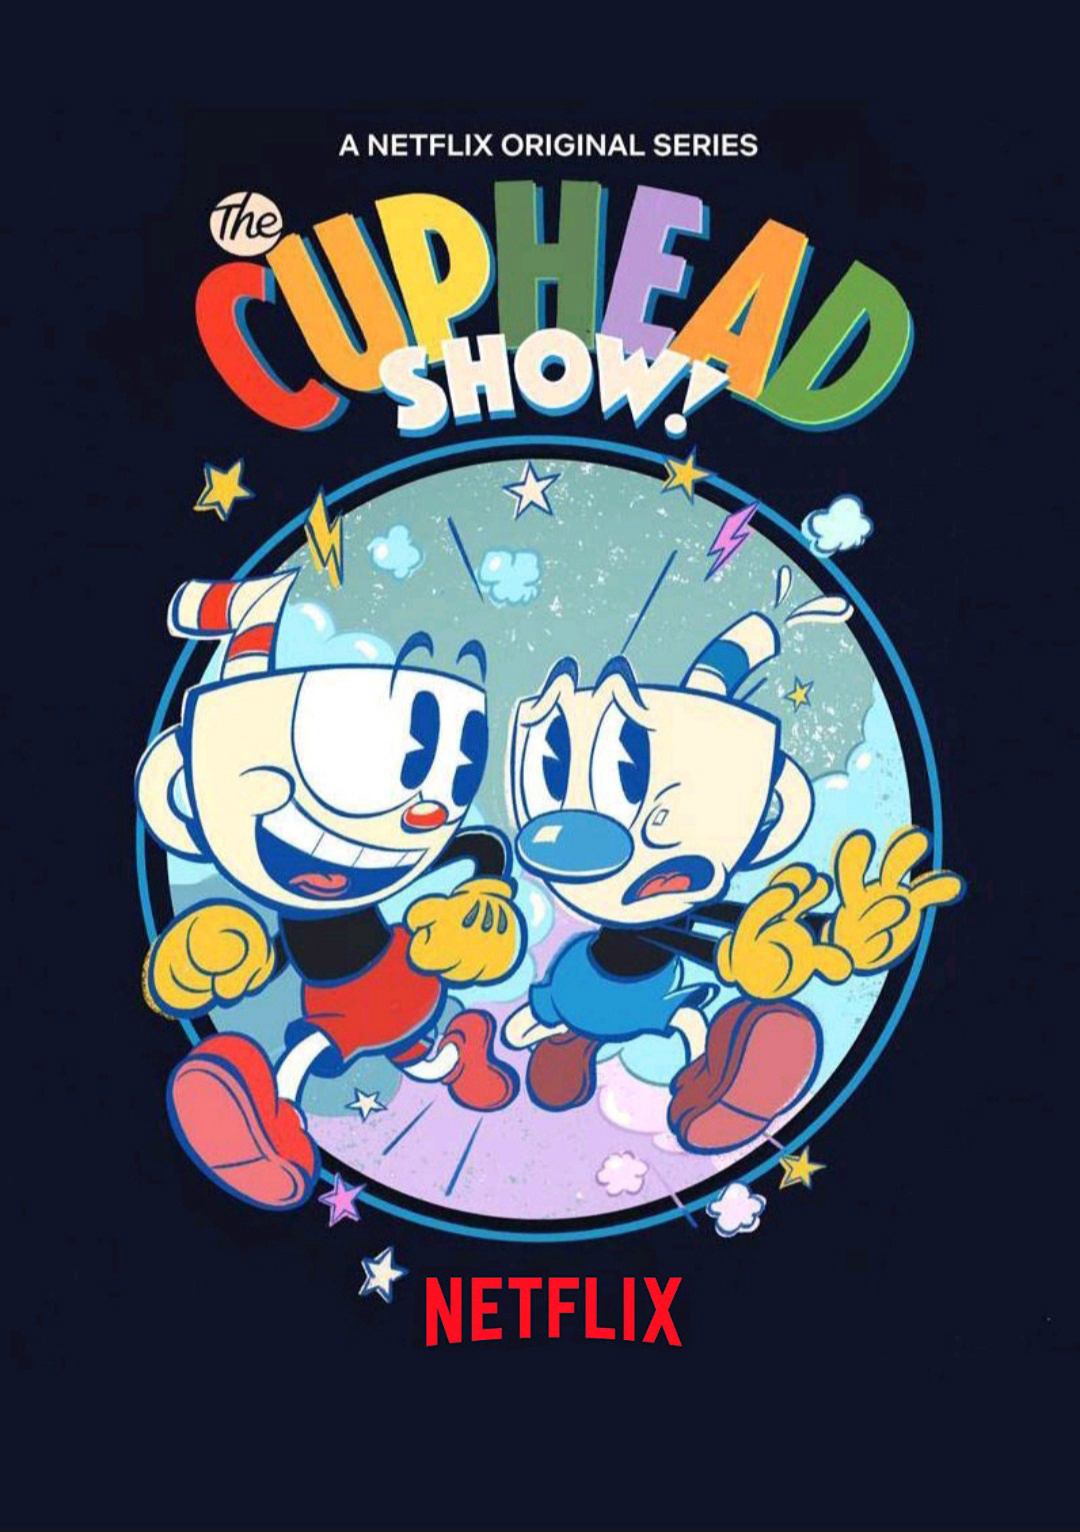 Poster Phim Anh em Cuphead (The Cuphead Show!)